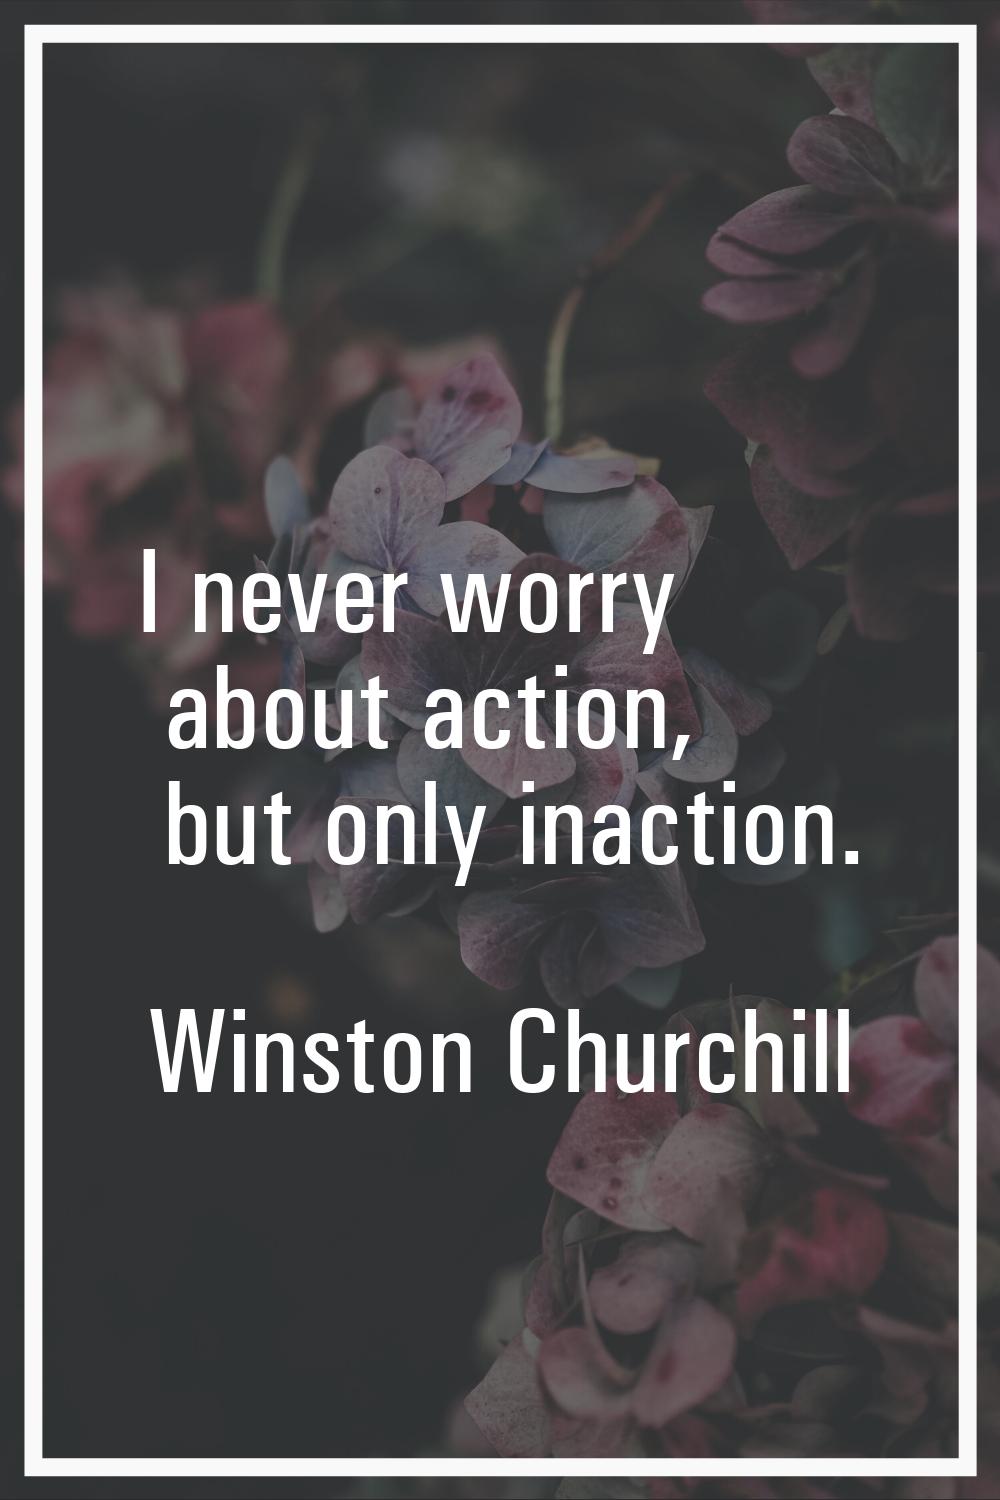 I never worry about action, but only inaction.